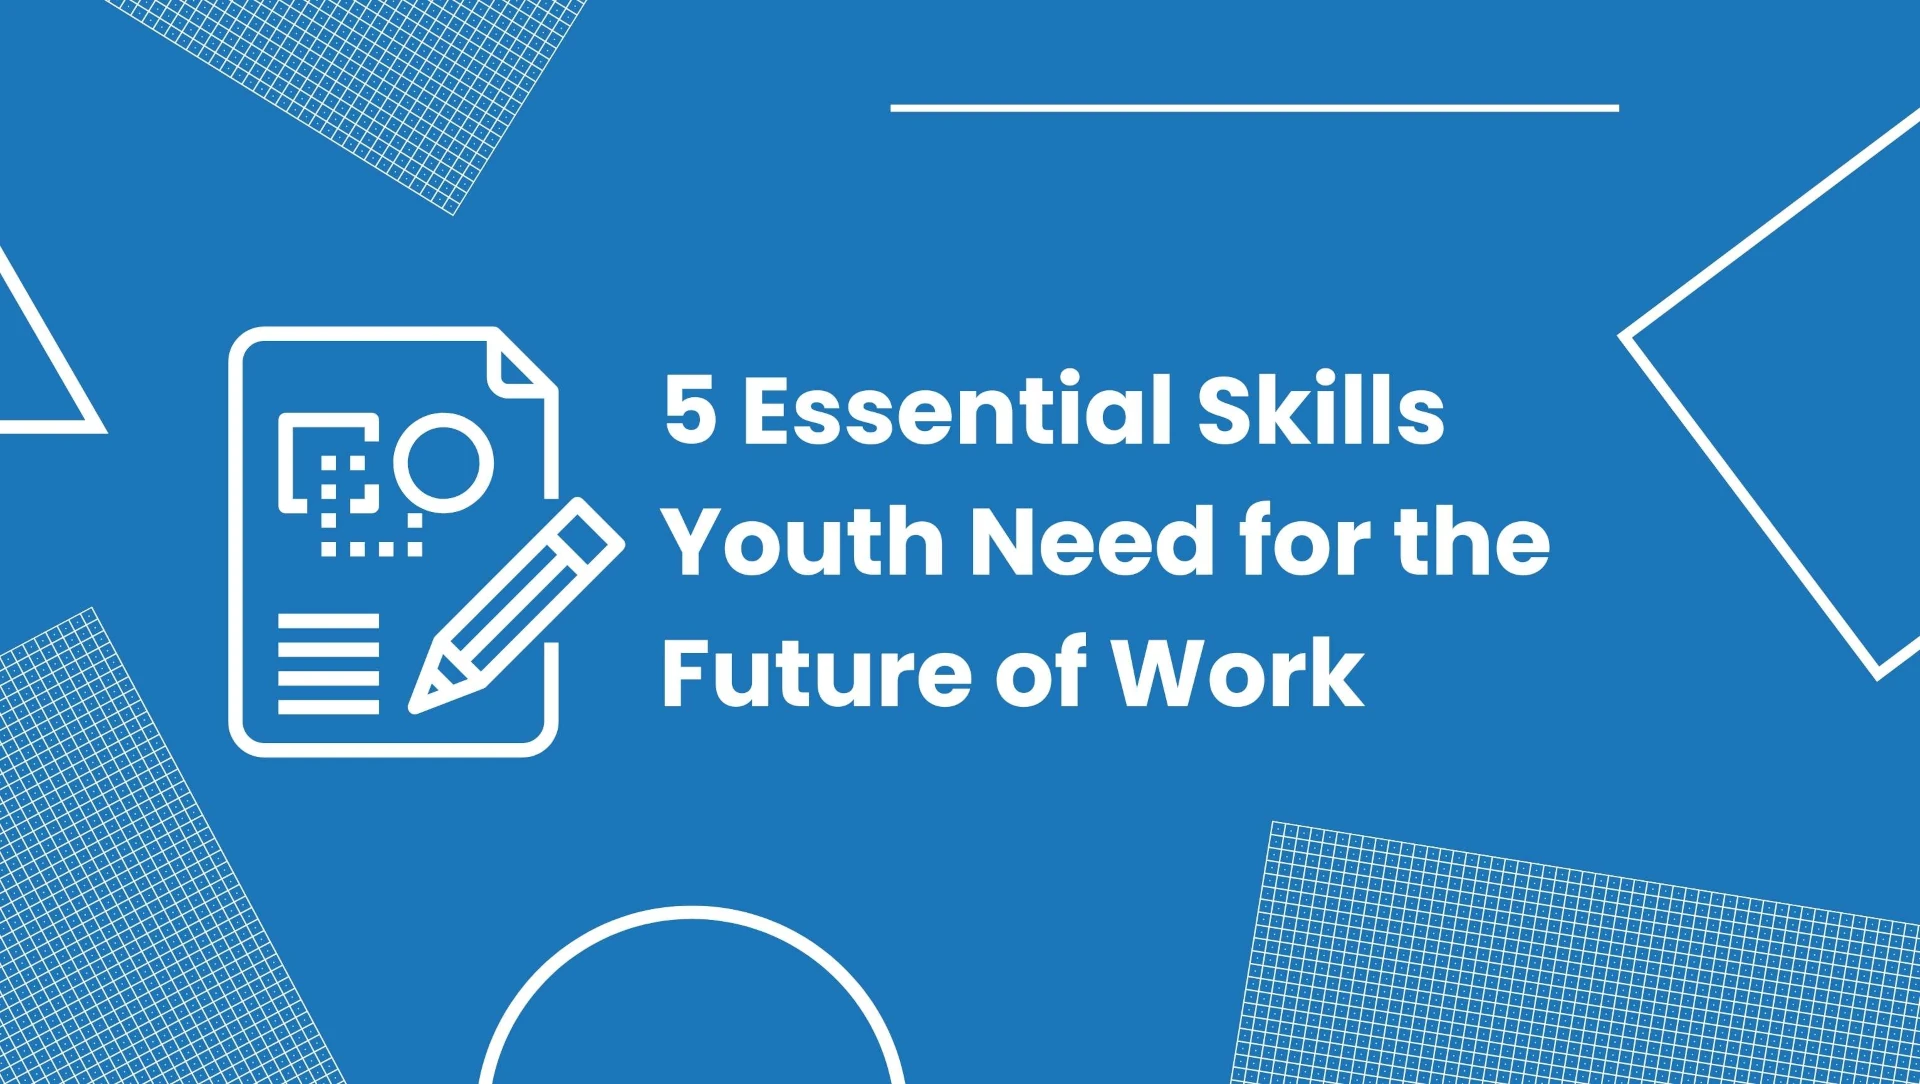 Banner: 5 Essential Skills Youth Need for the Future of Work.